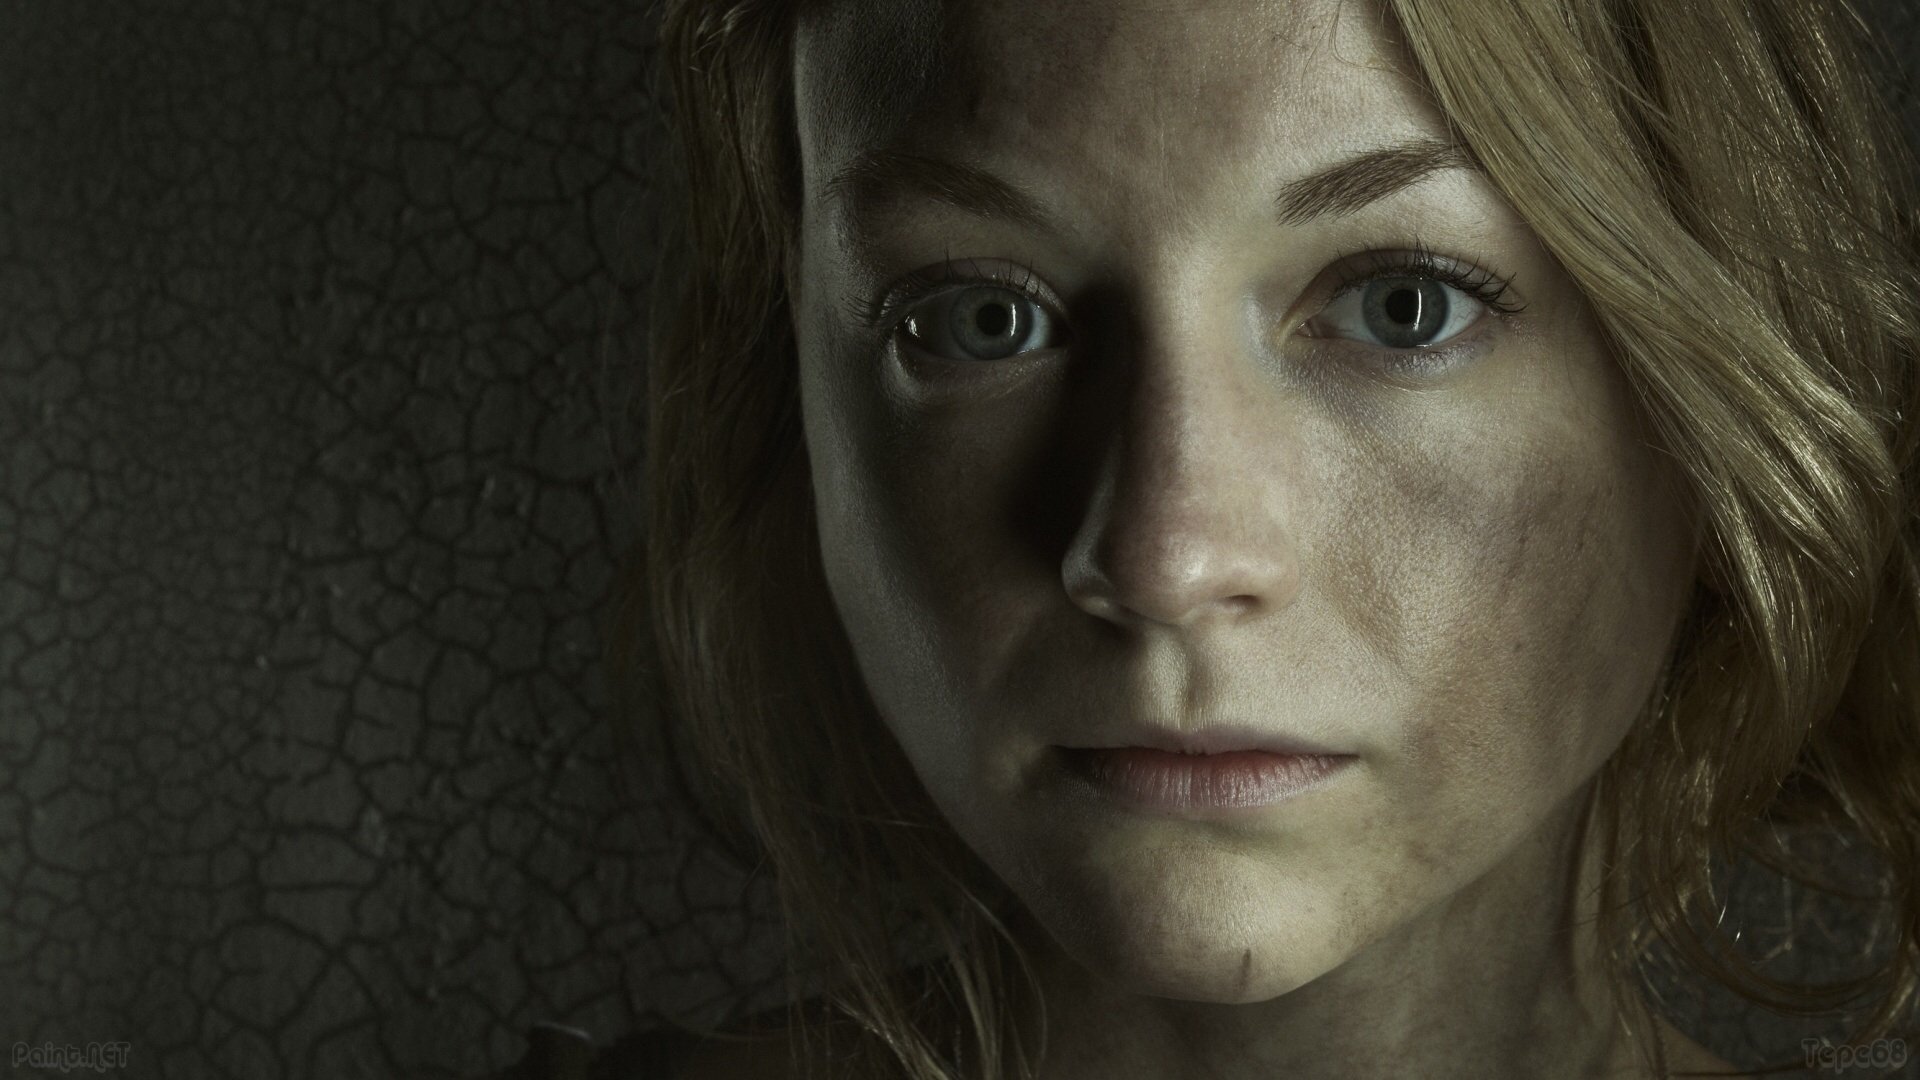 5 Beth Greene Hd Wallpapers Background Images Wallpaper Abyss Images, Photos, Reviews